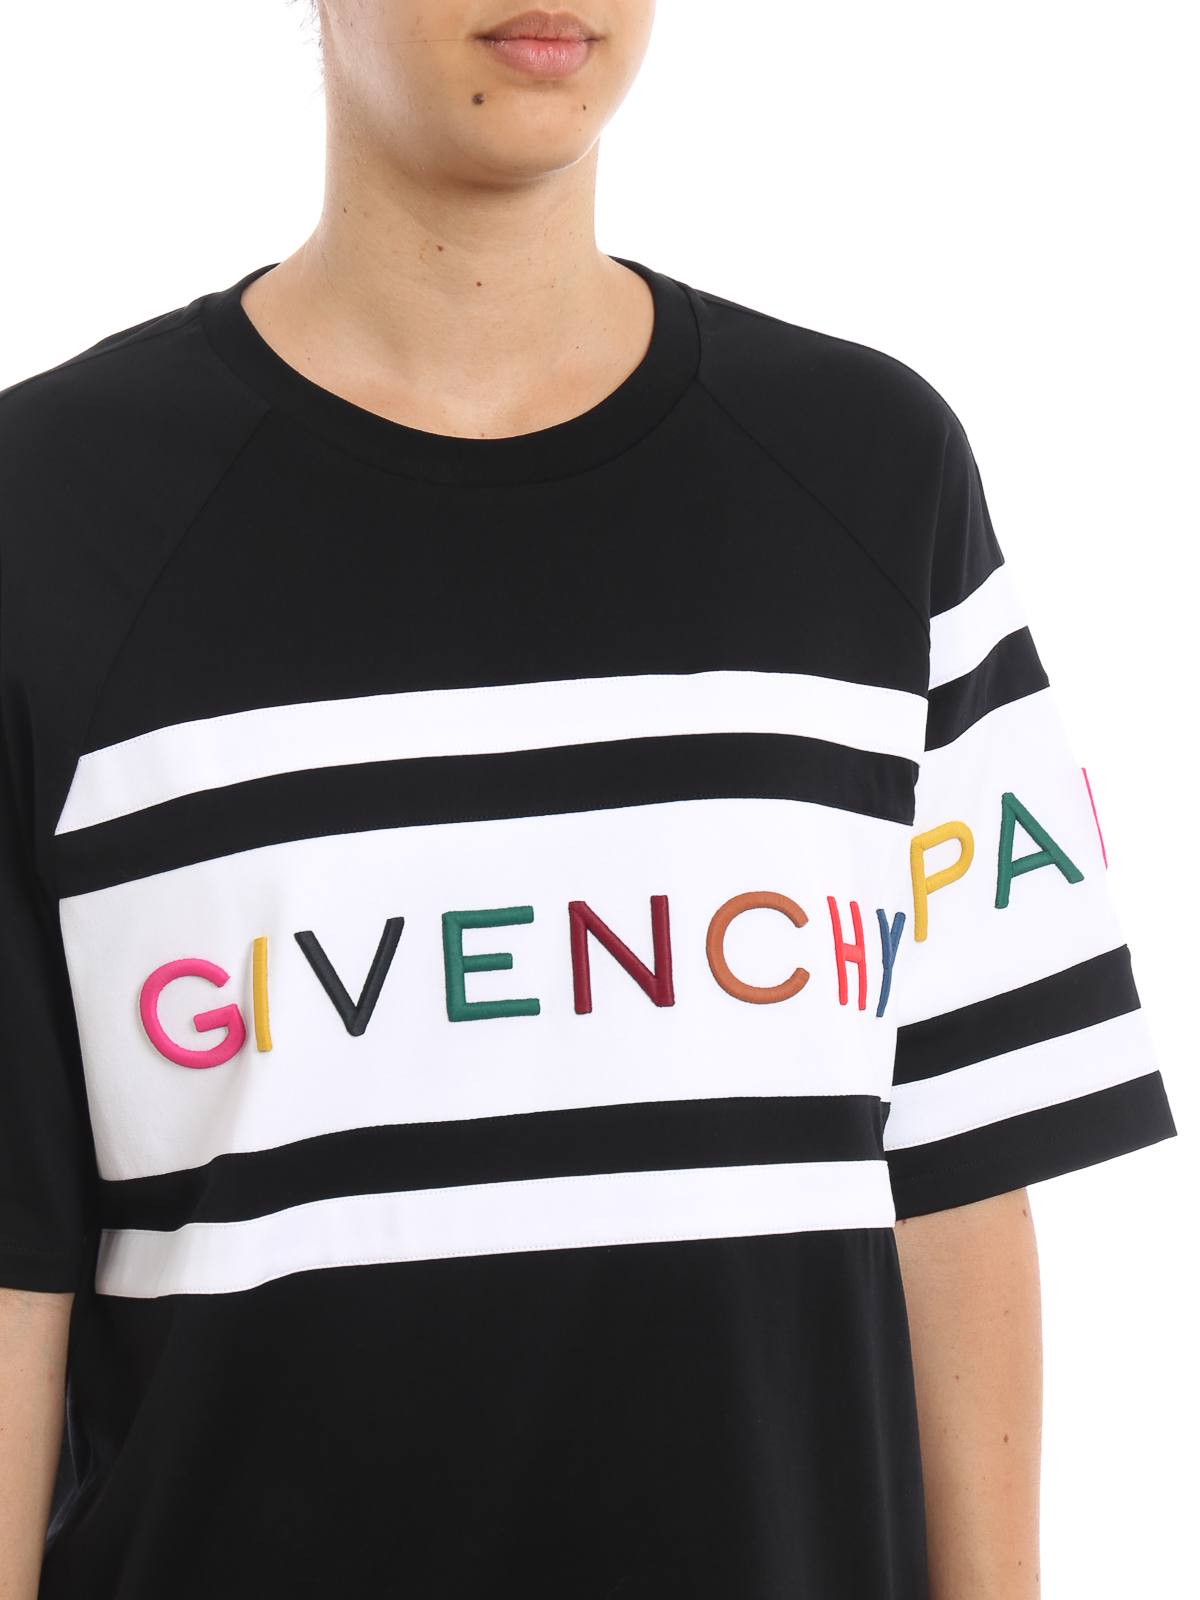 givenchy t shirt prices